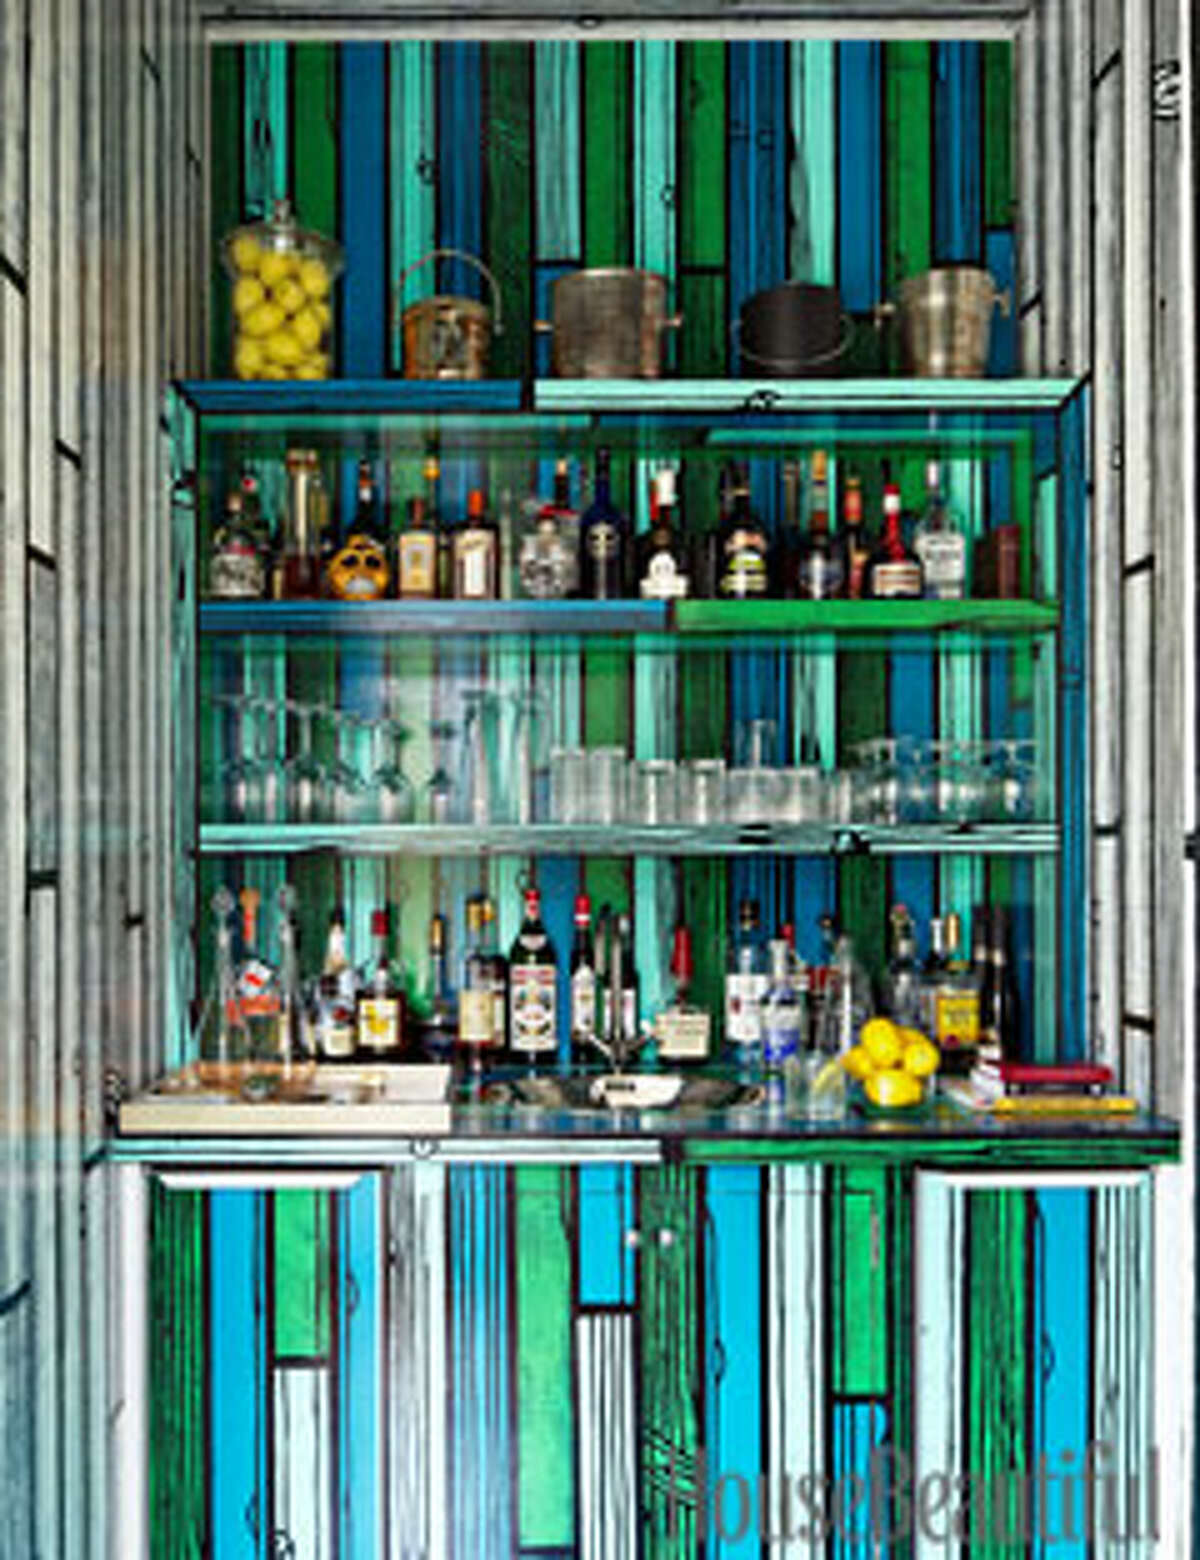 Art Bar The homeowner of a house in East Hampton, New York, asked artist Richard Woods to work his fun, faux-bois magic on the bar, transforming a closet-like space into a vivid focal point. "It's artistic, but very much a bar," designer Mica Ertegun says. "It's whimsical, fun, unexpected — and one-of-a-kind."